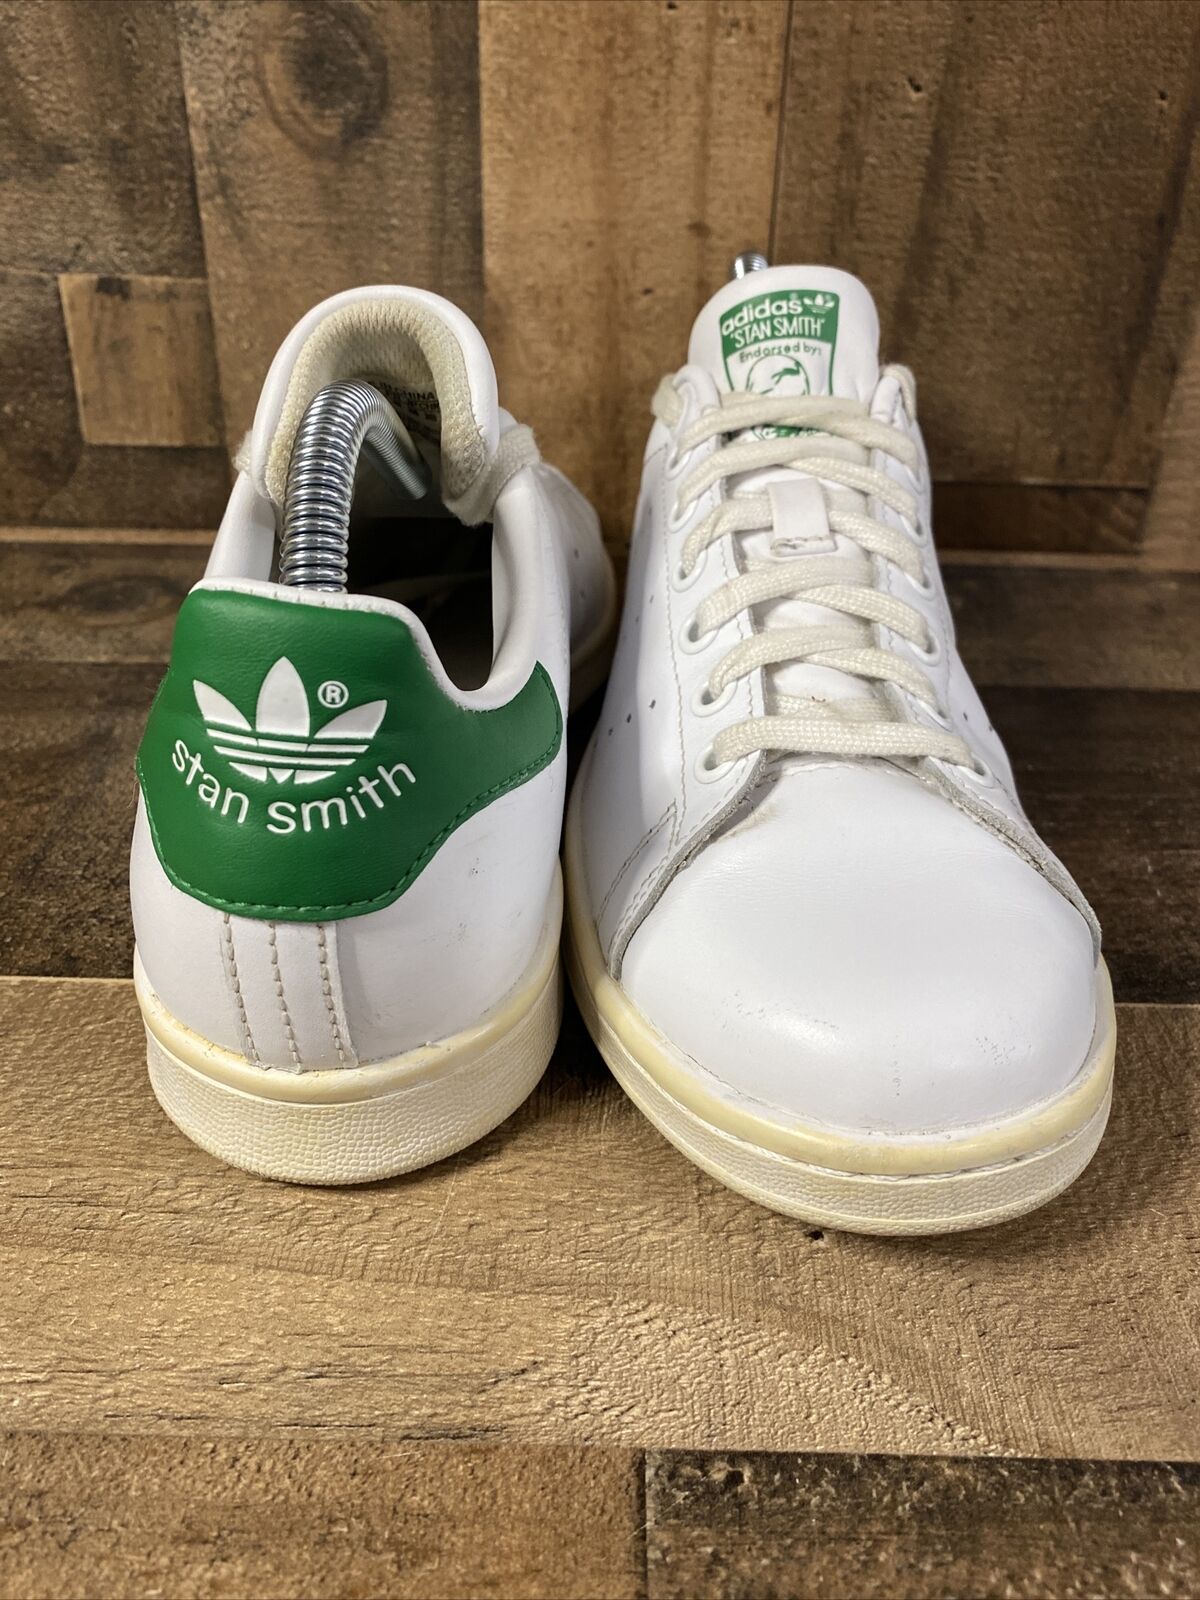 Adidas Womens Stan Smith B24105 White Green Lace Up Low Top Sneaker Shoes Size 8